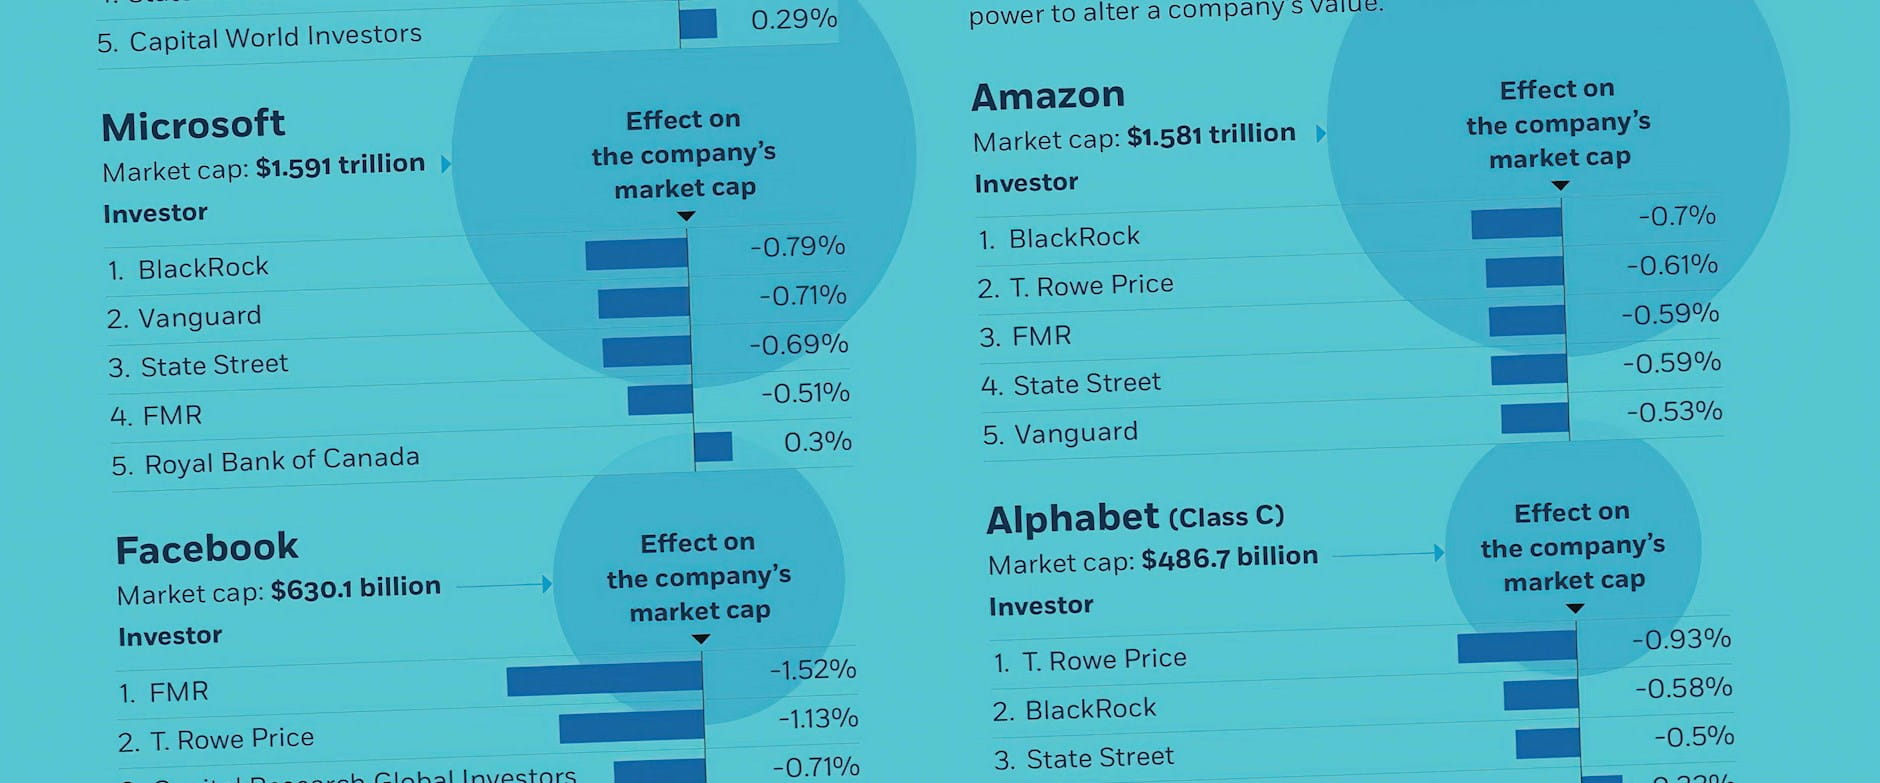 Tech companies and market cap listings among investors